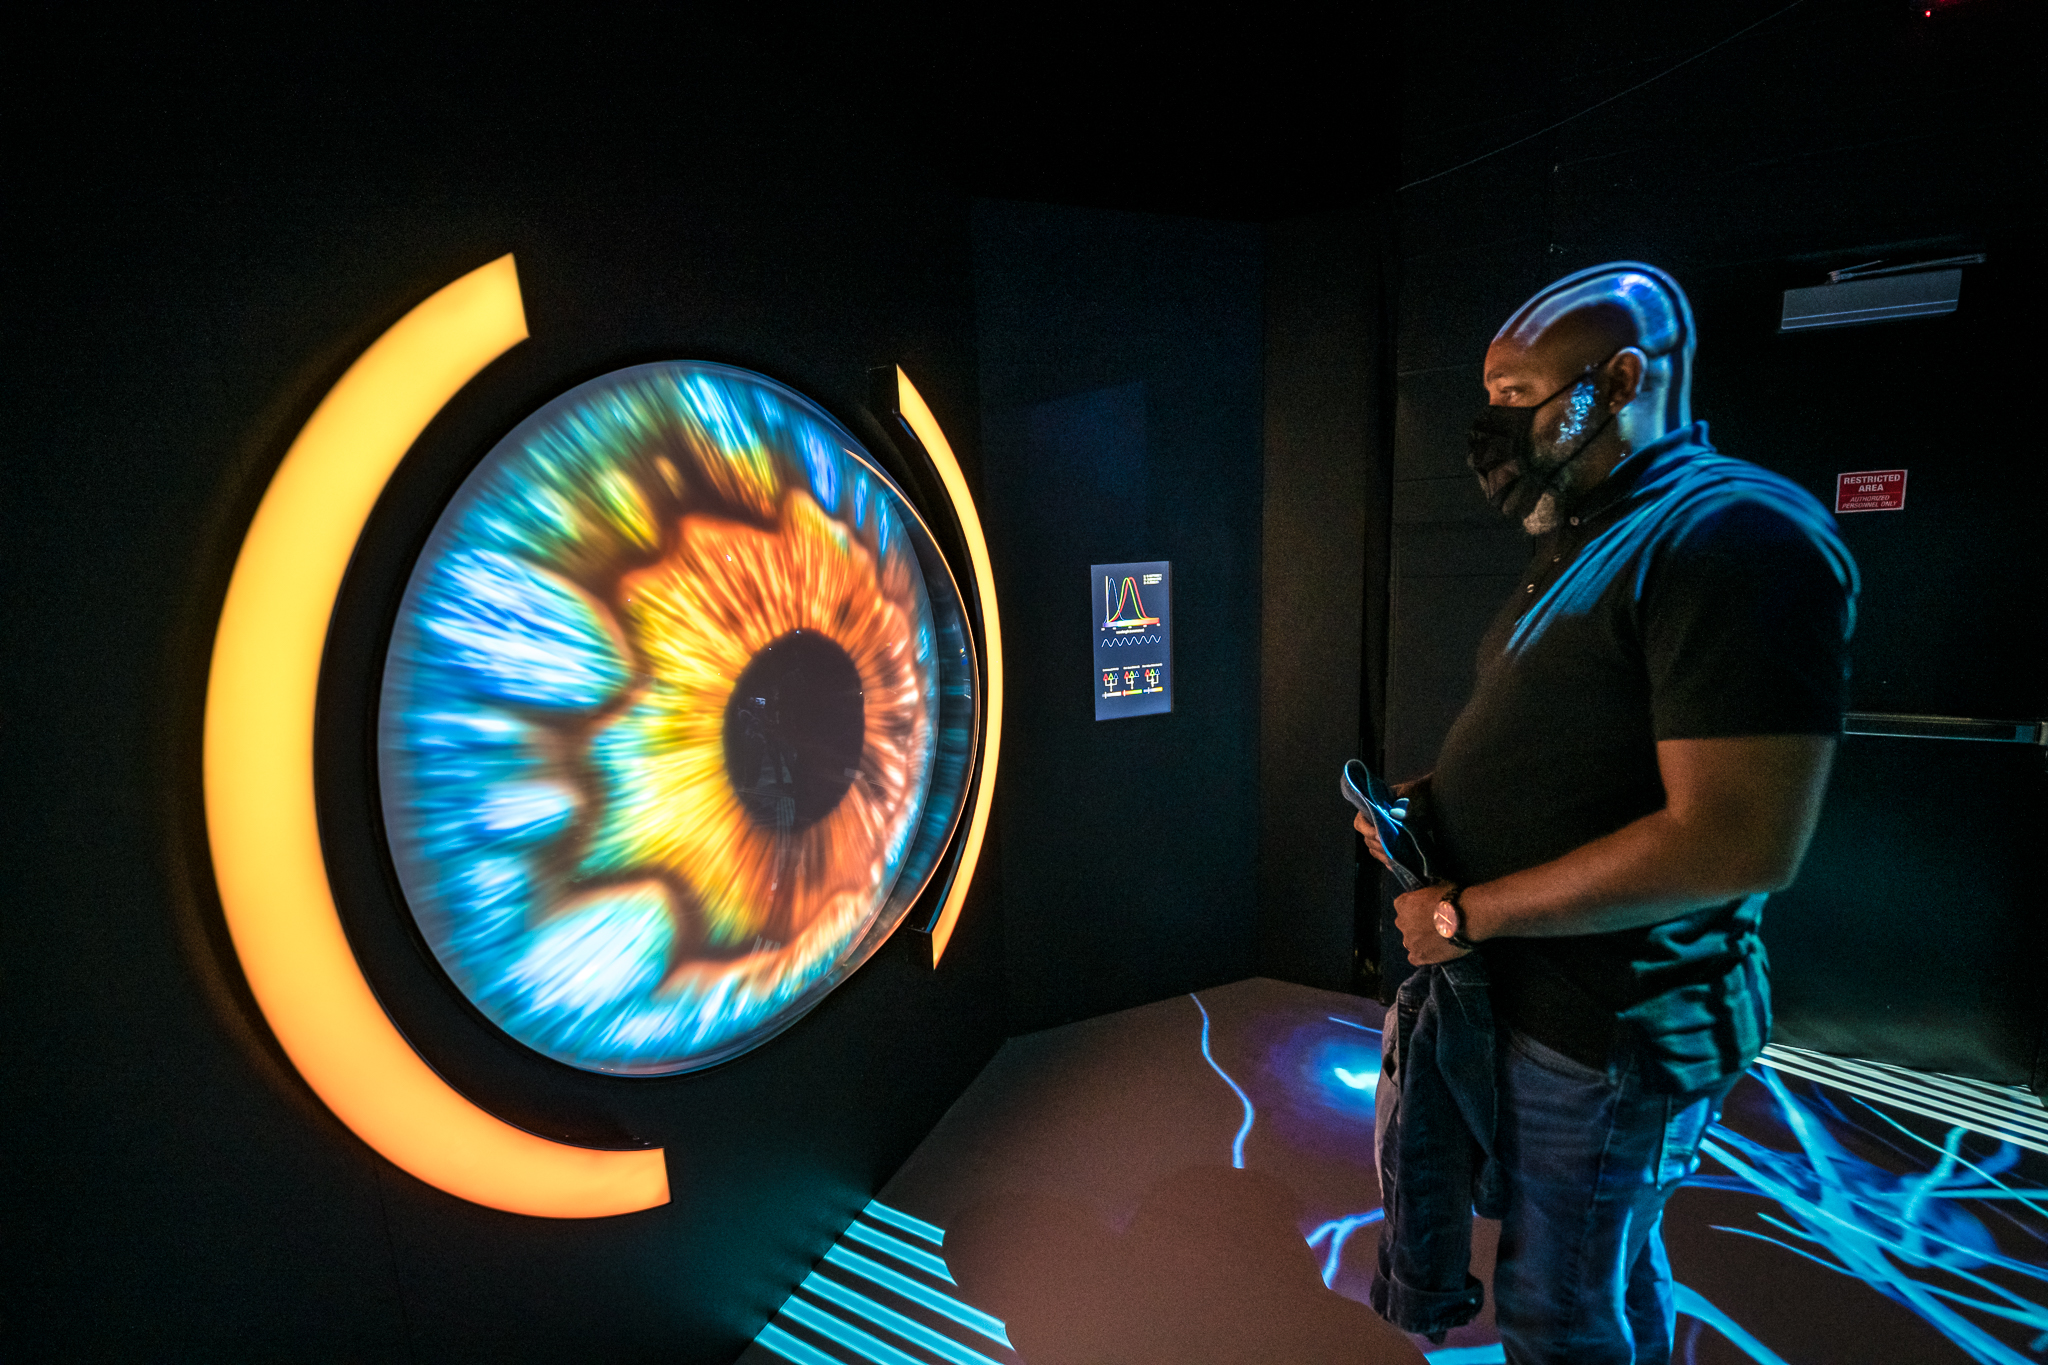 Image of a man interacting with the vision display at the SfN and ARTECHOUSE collaboration exhibit.